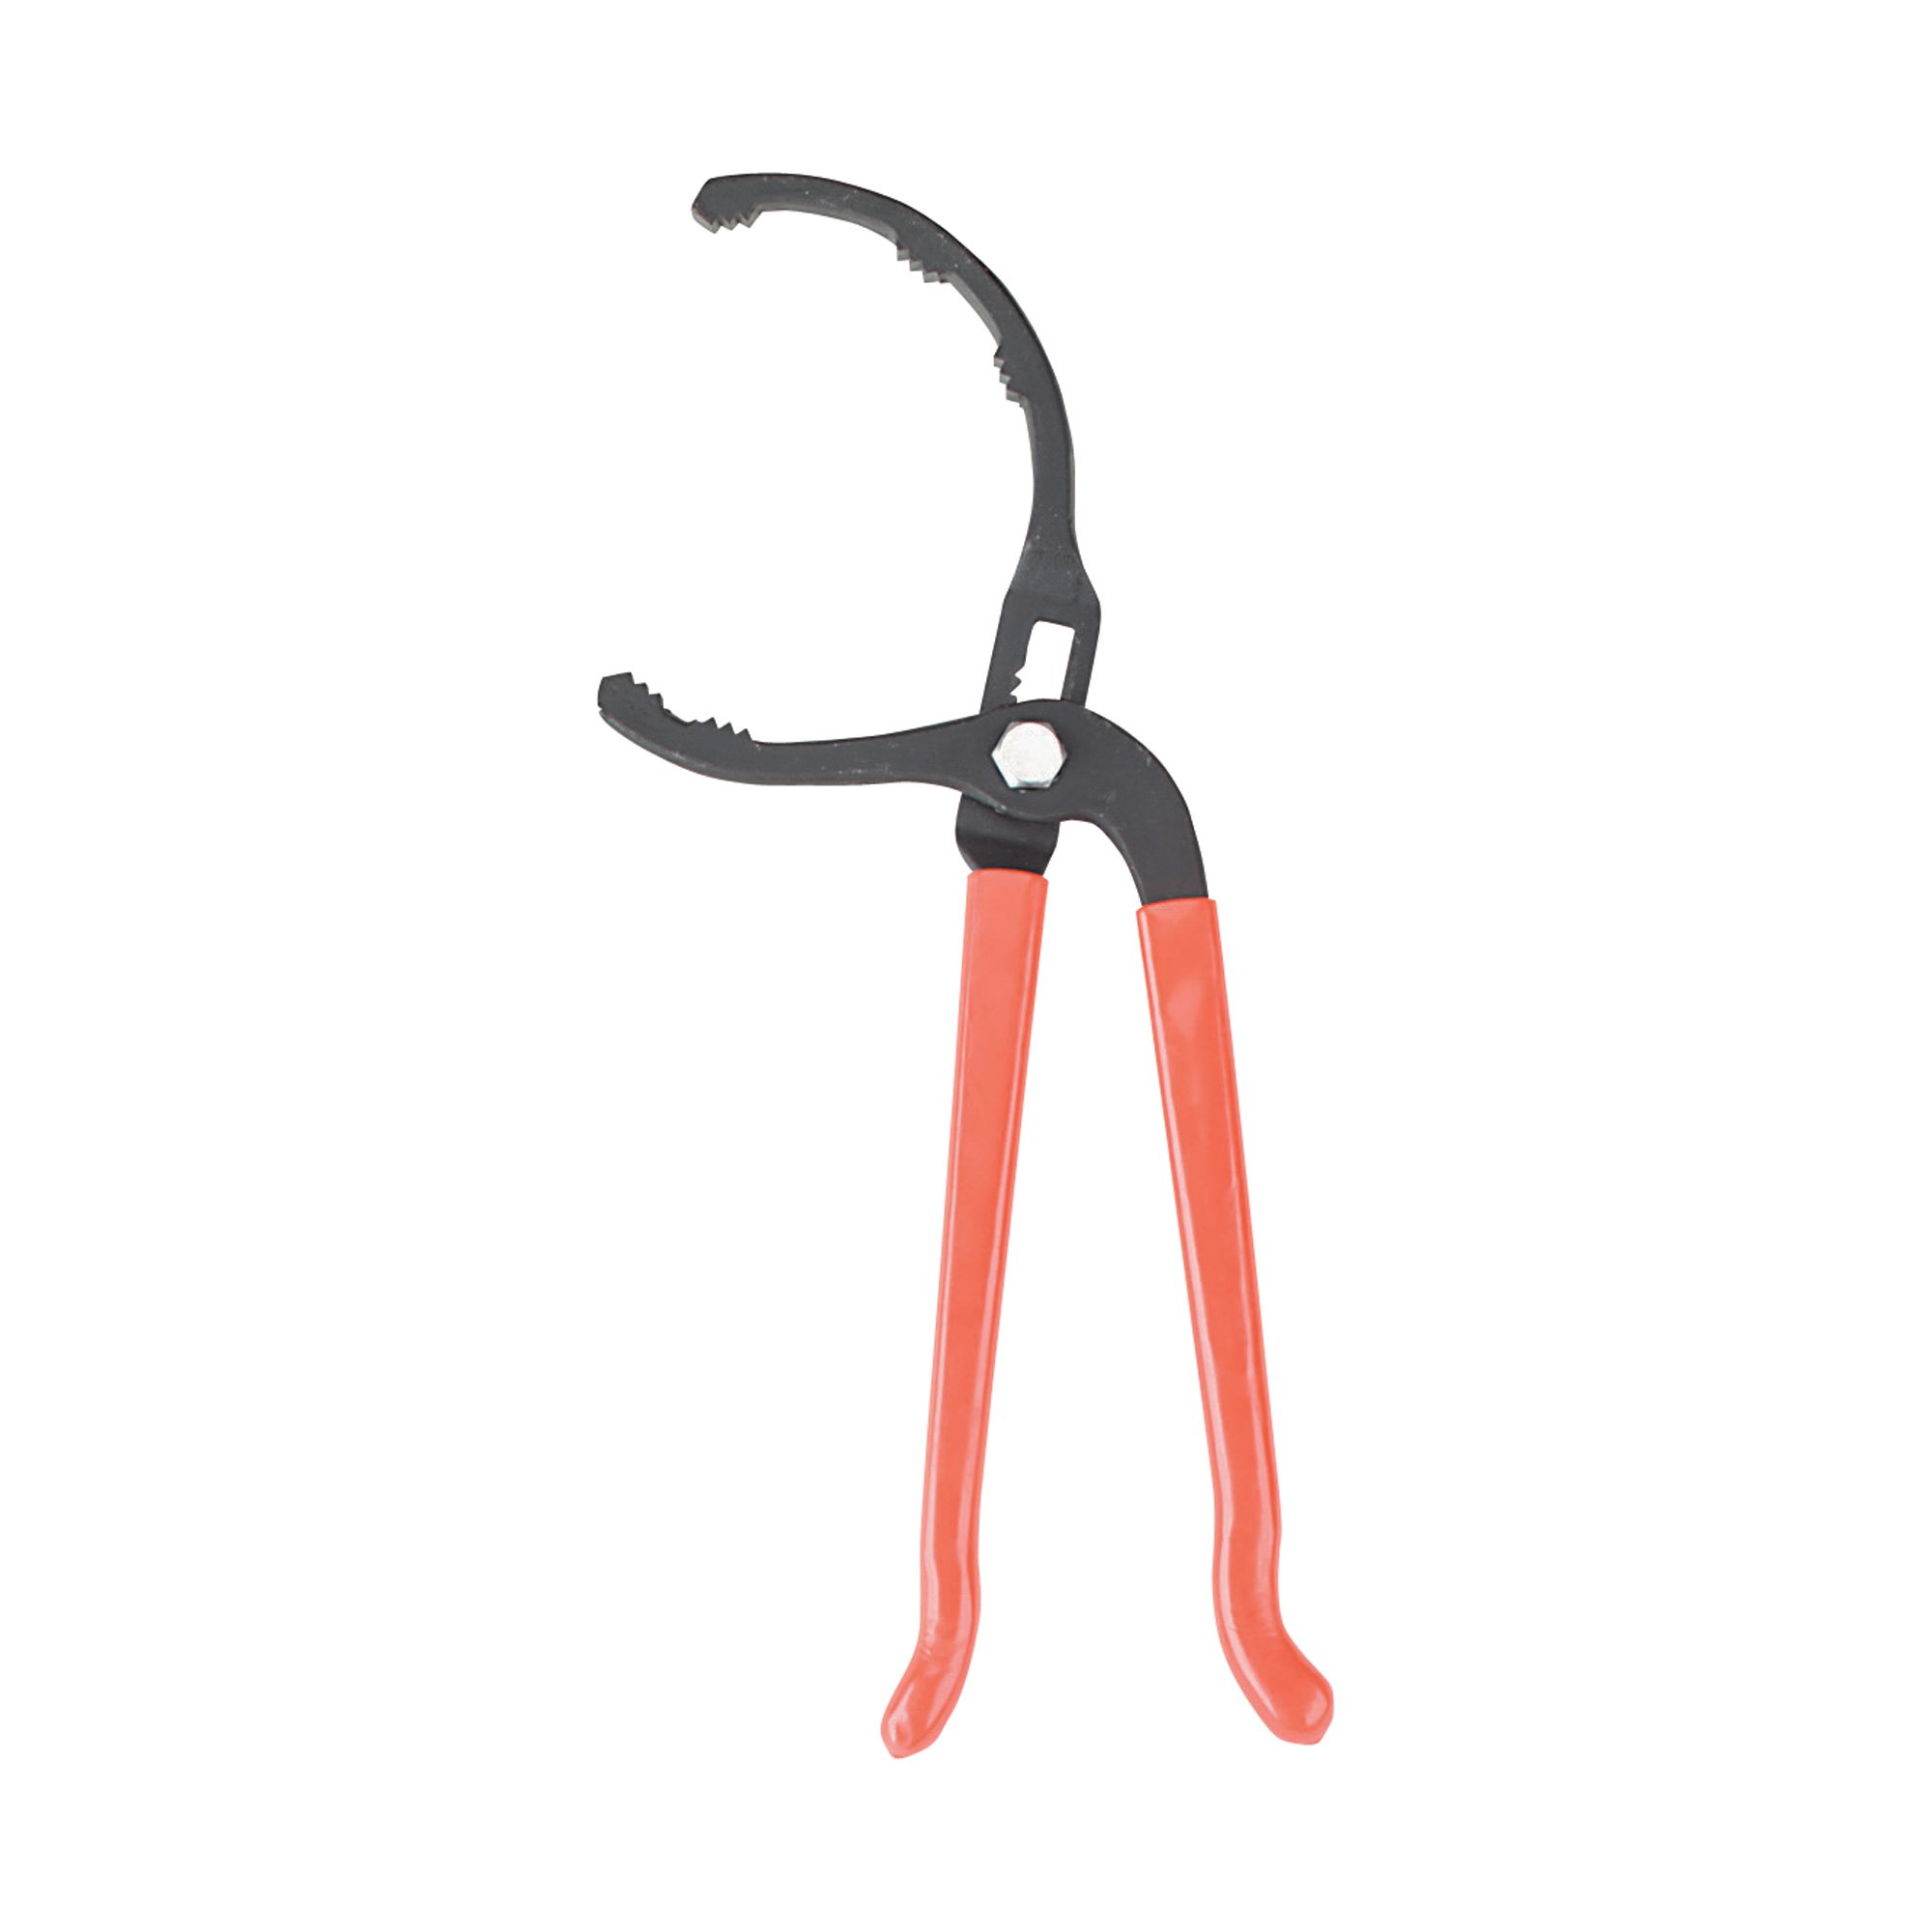 Northern Industrial Tools Oil Filter Pliers — Large